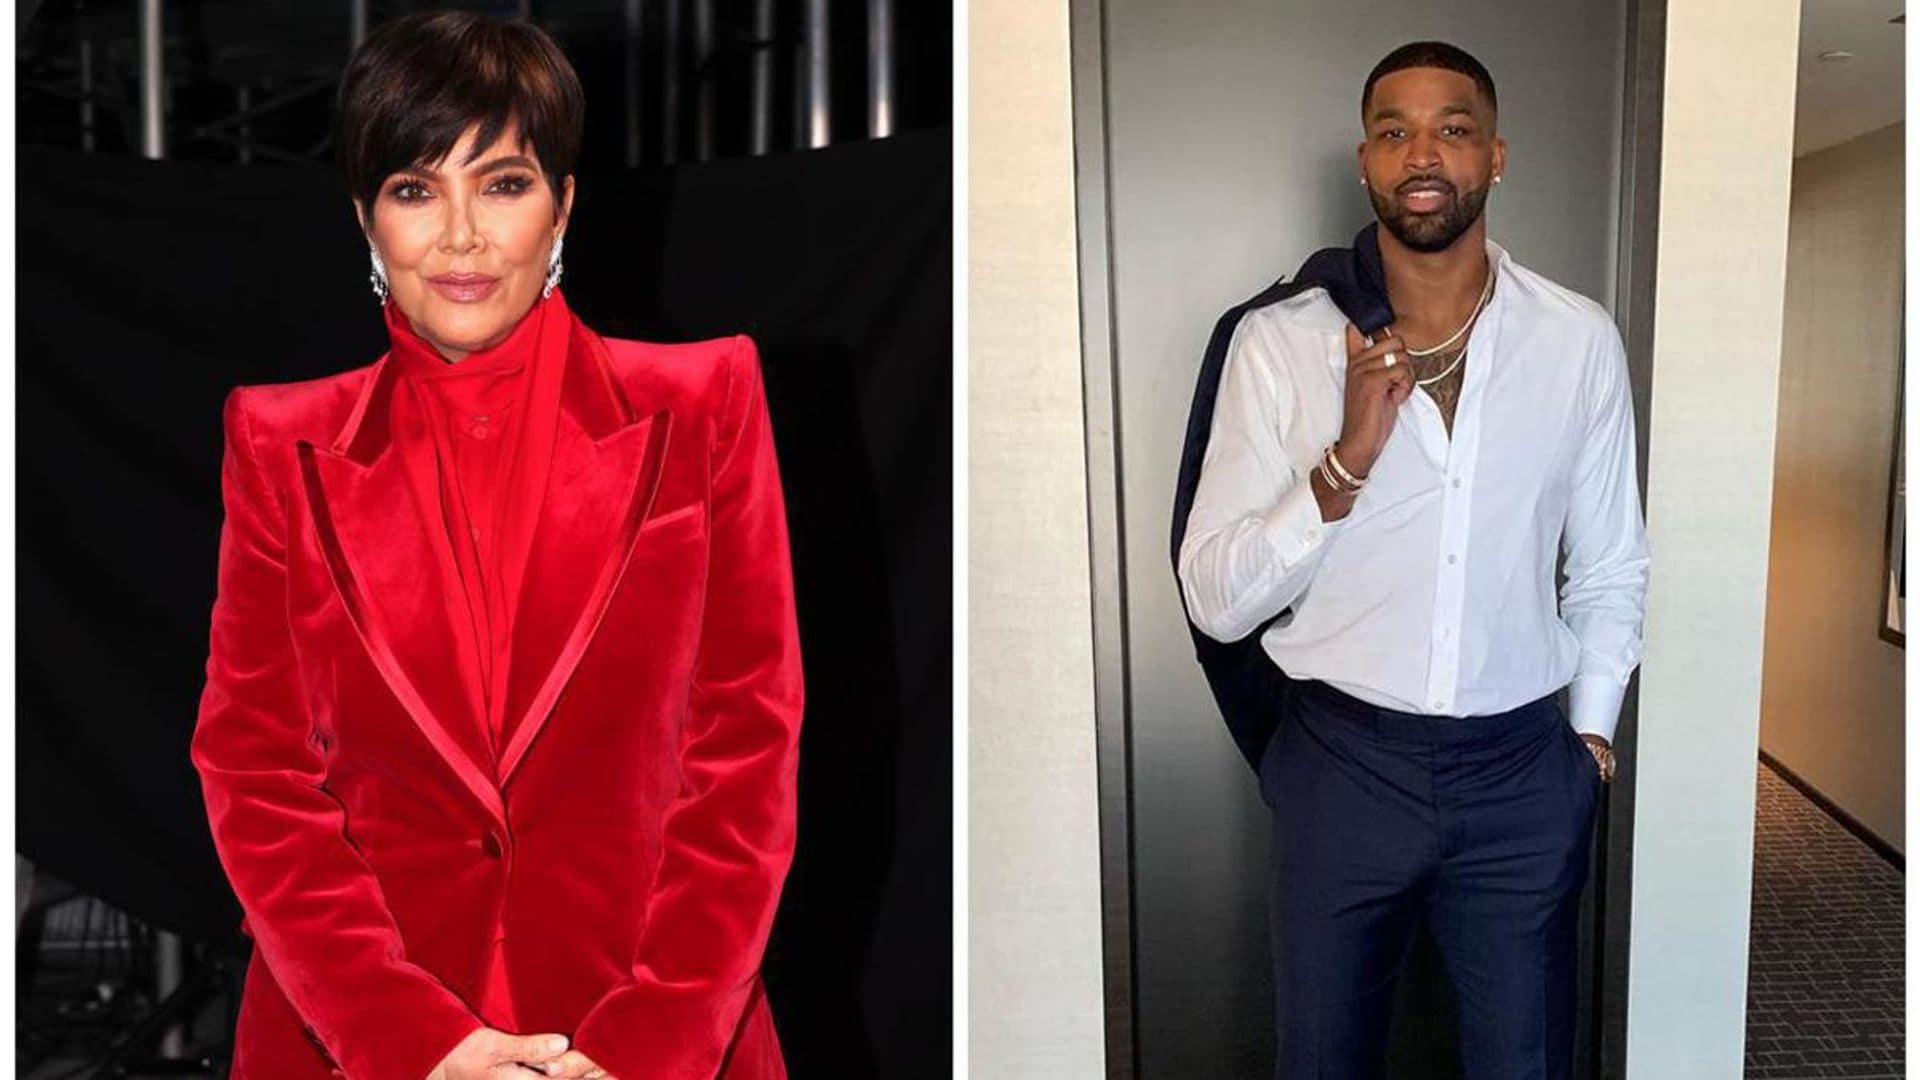 Fans of Khloe Kardashian call out Kris Jenner for accepting a gift from Tristan Thompson